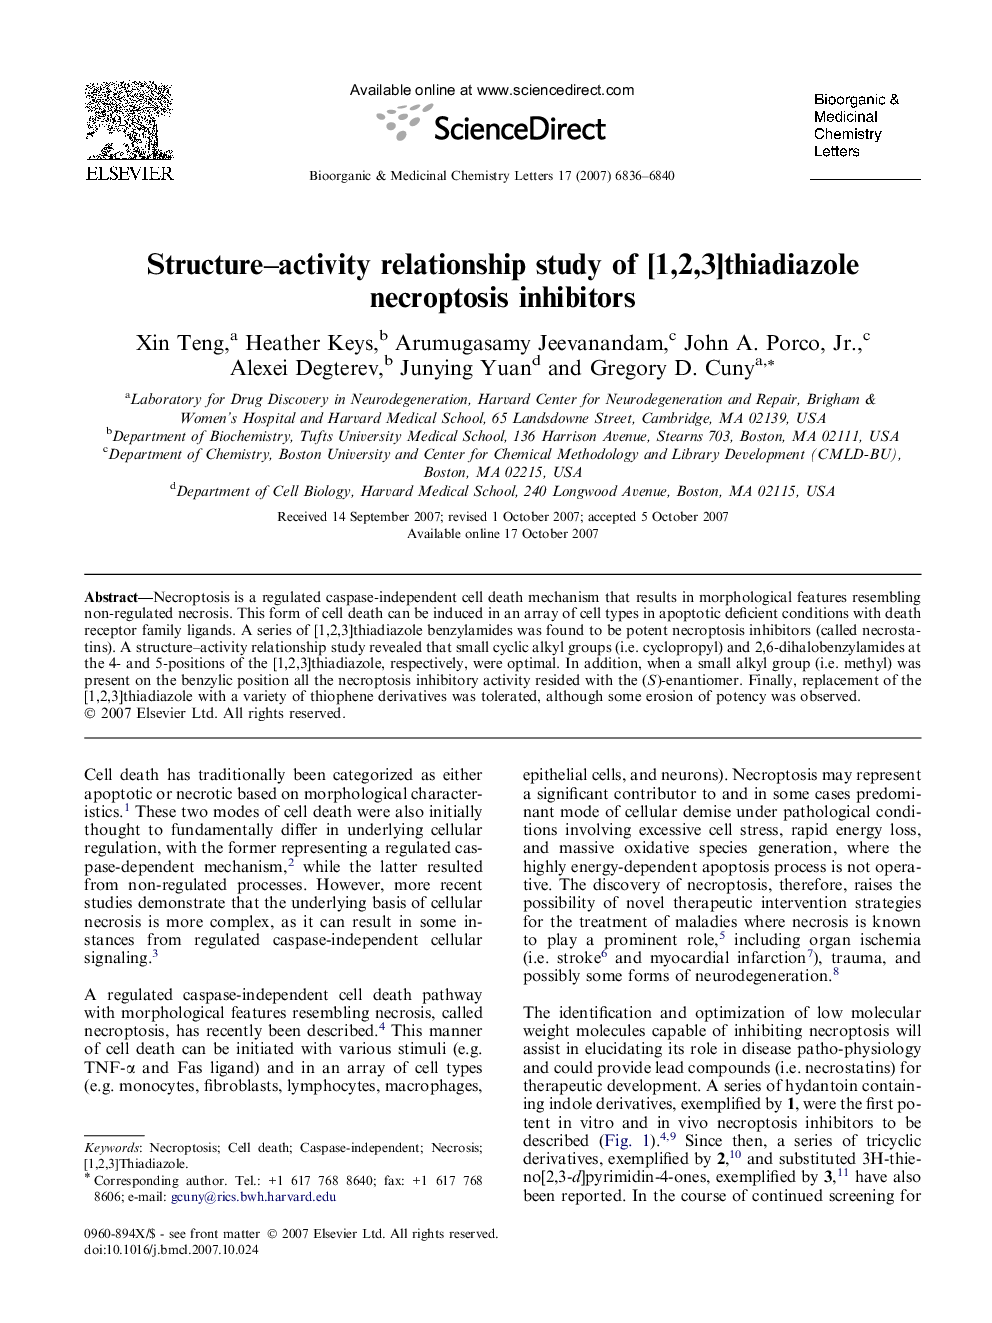 Structure–activity relationship study of [1,2,3]thiadiazole necroptosis inhibitors